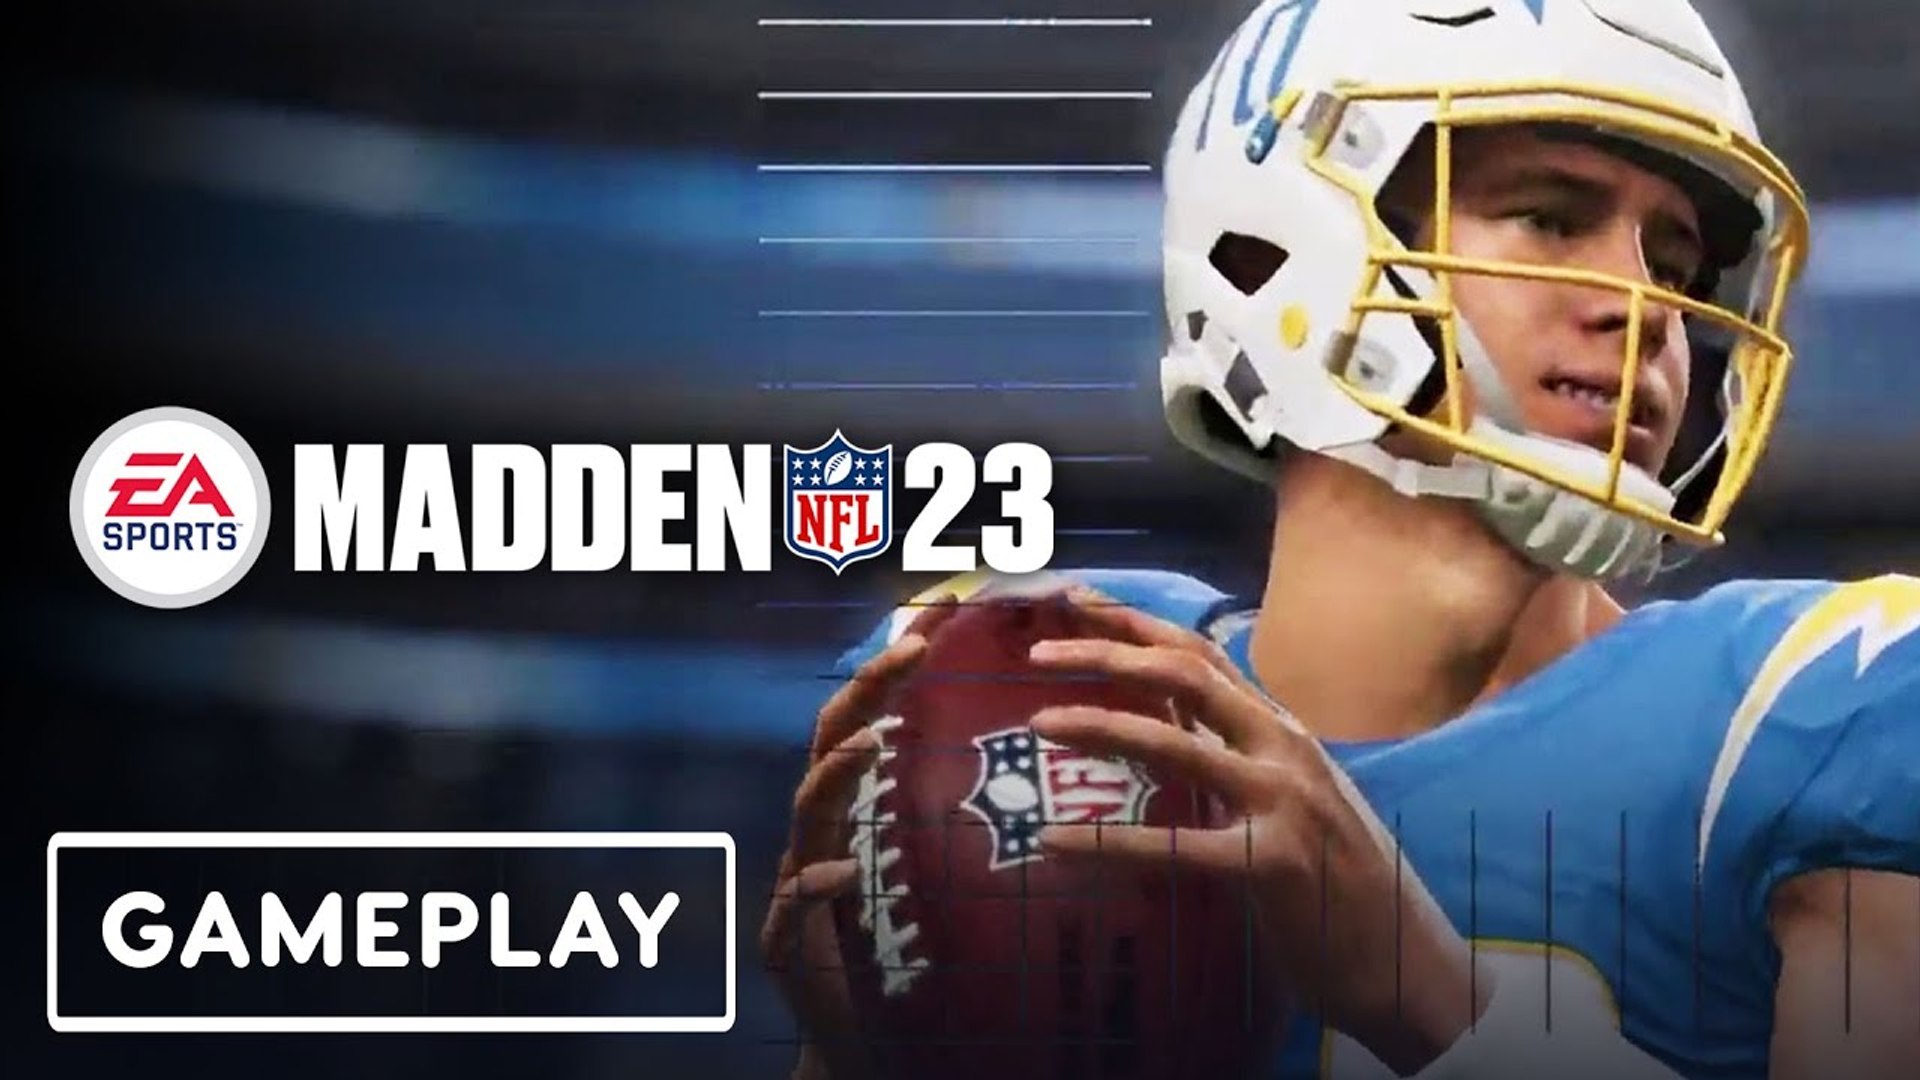 new madden 23 cover